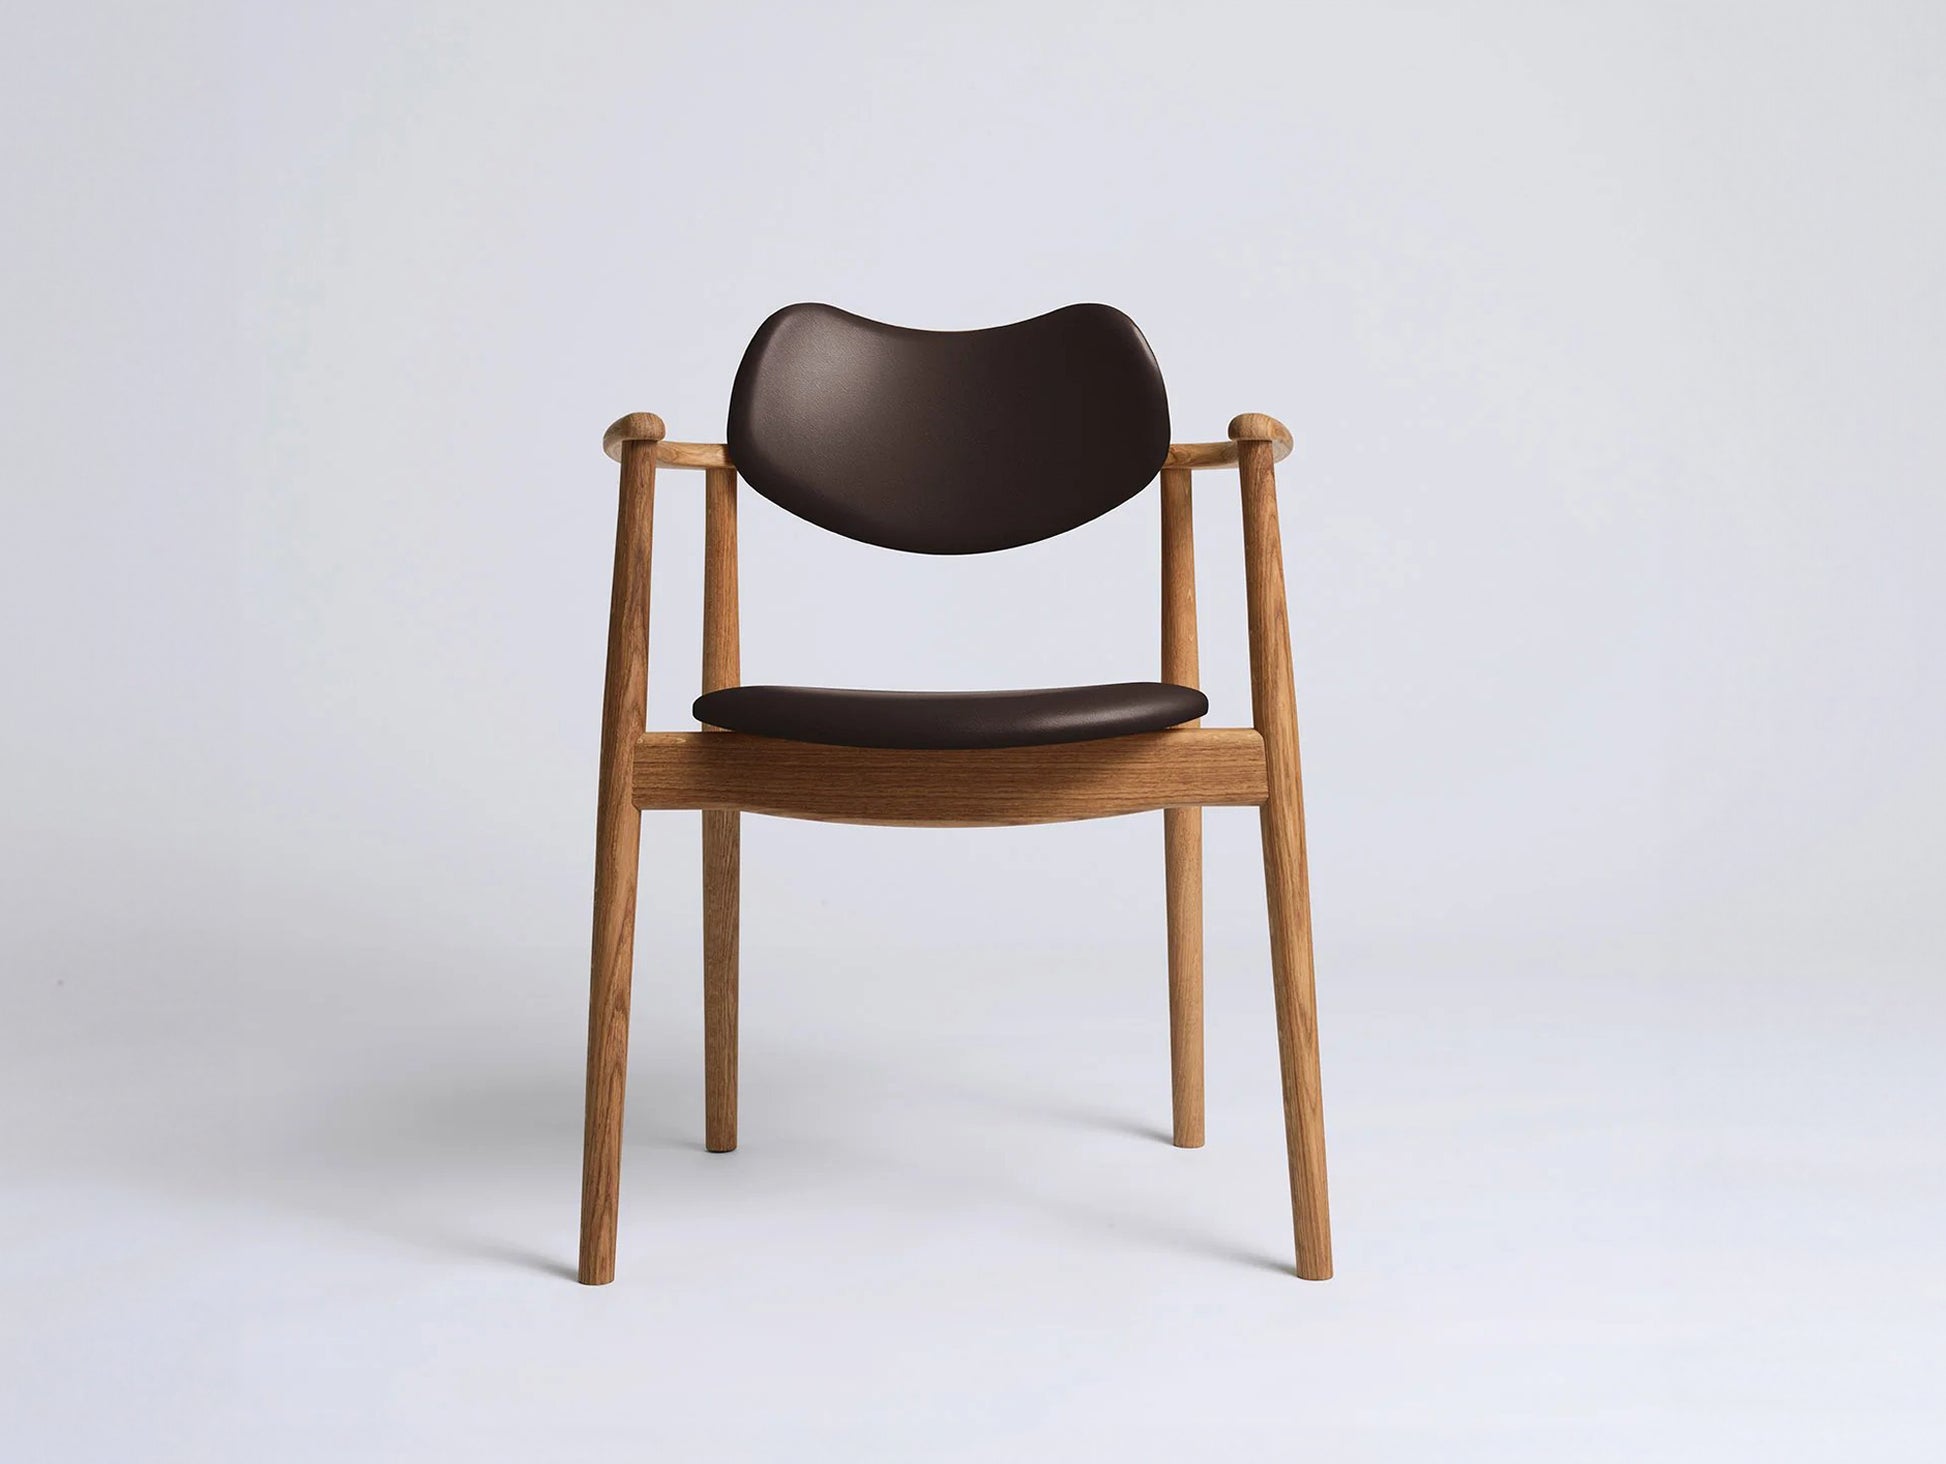 Regatta Chair Seat and Back Upholstered by Ro Collection - Oiled Oak / Exclusive Chocolate Brown Leather